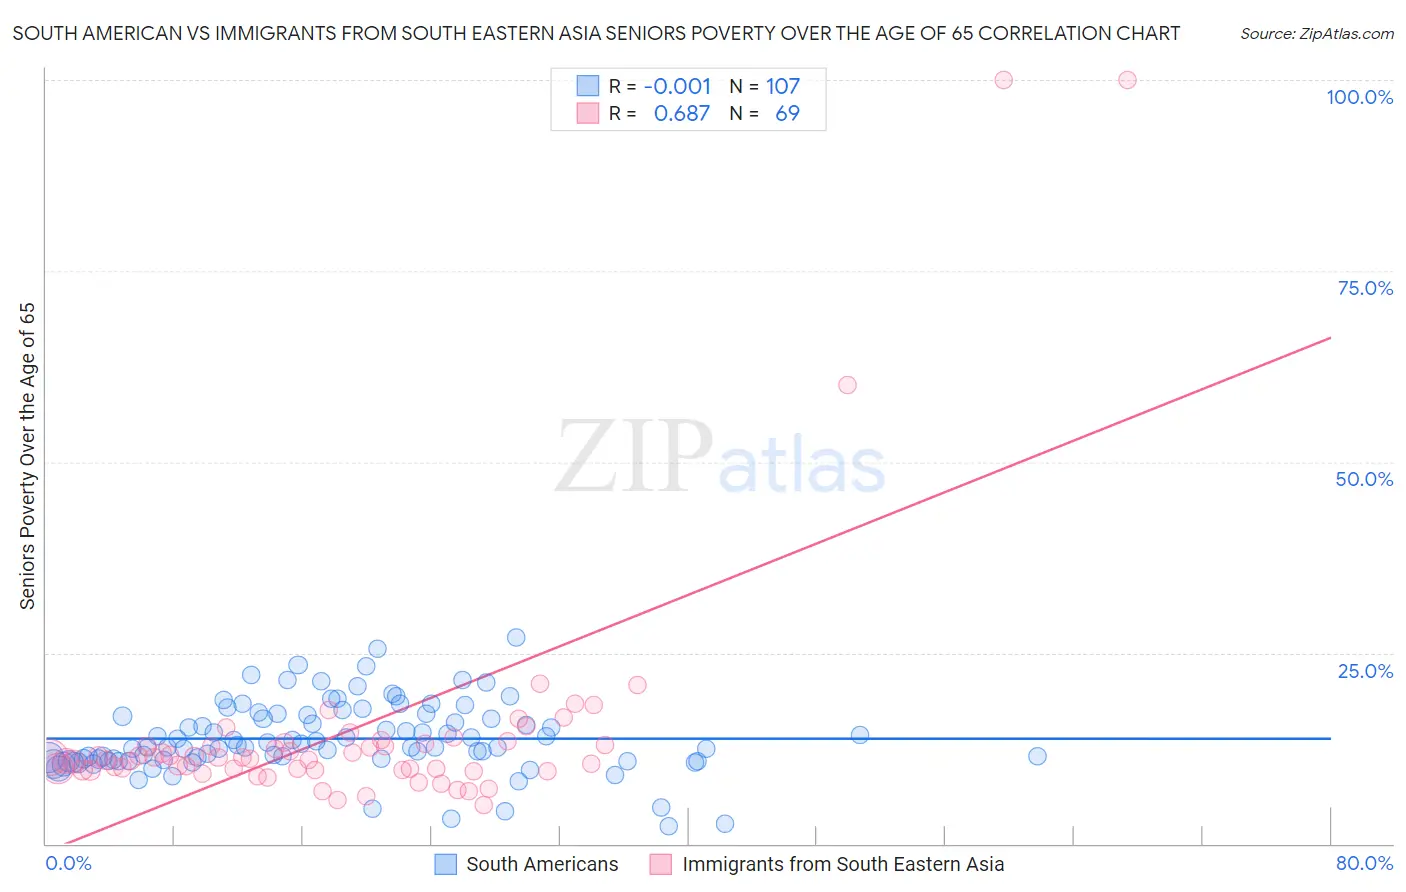 South American vs Immigrants from South Eastern Asia Seniors Poverty Over the Age of 65